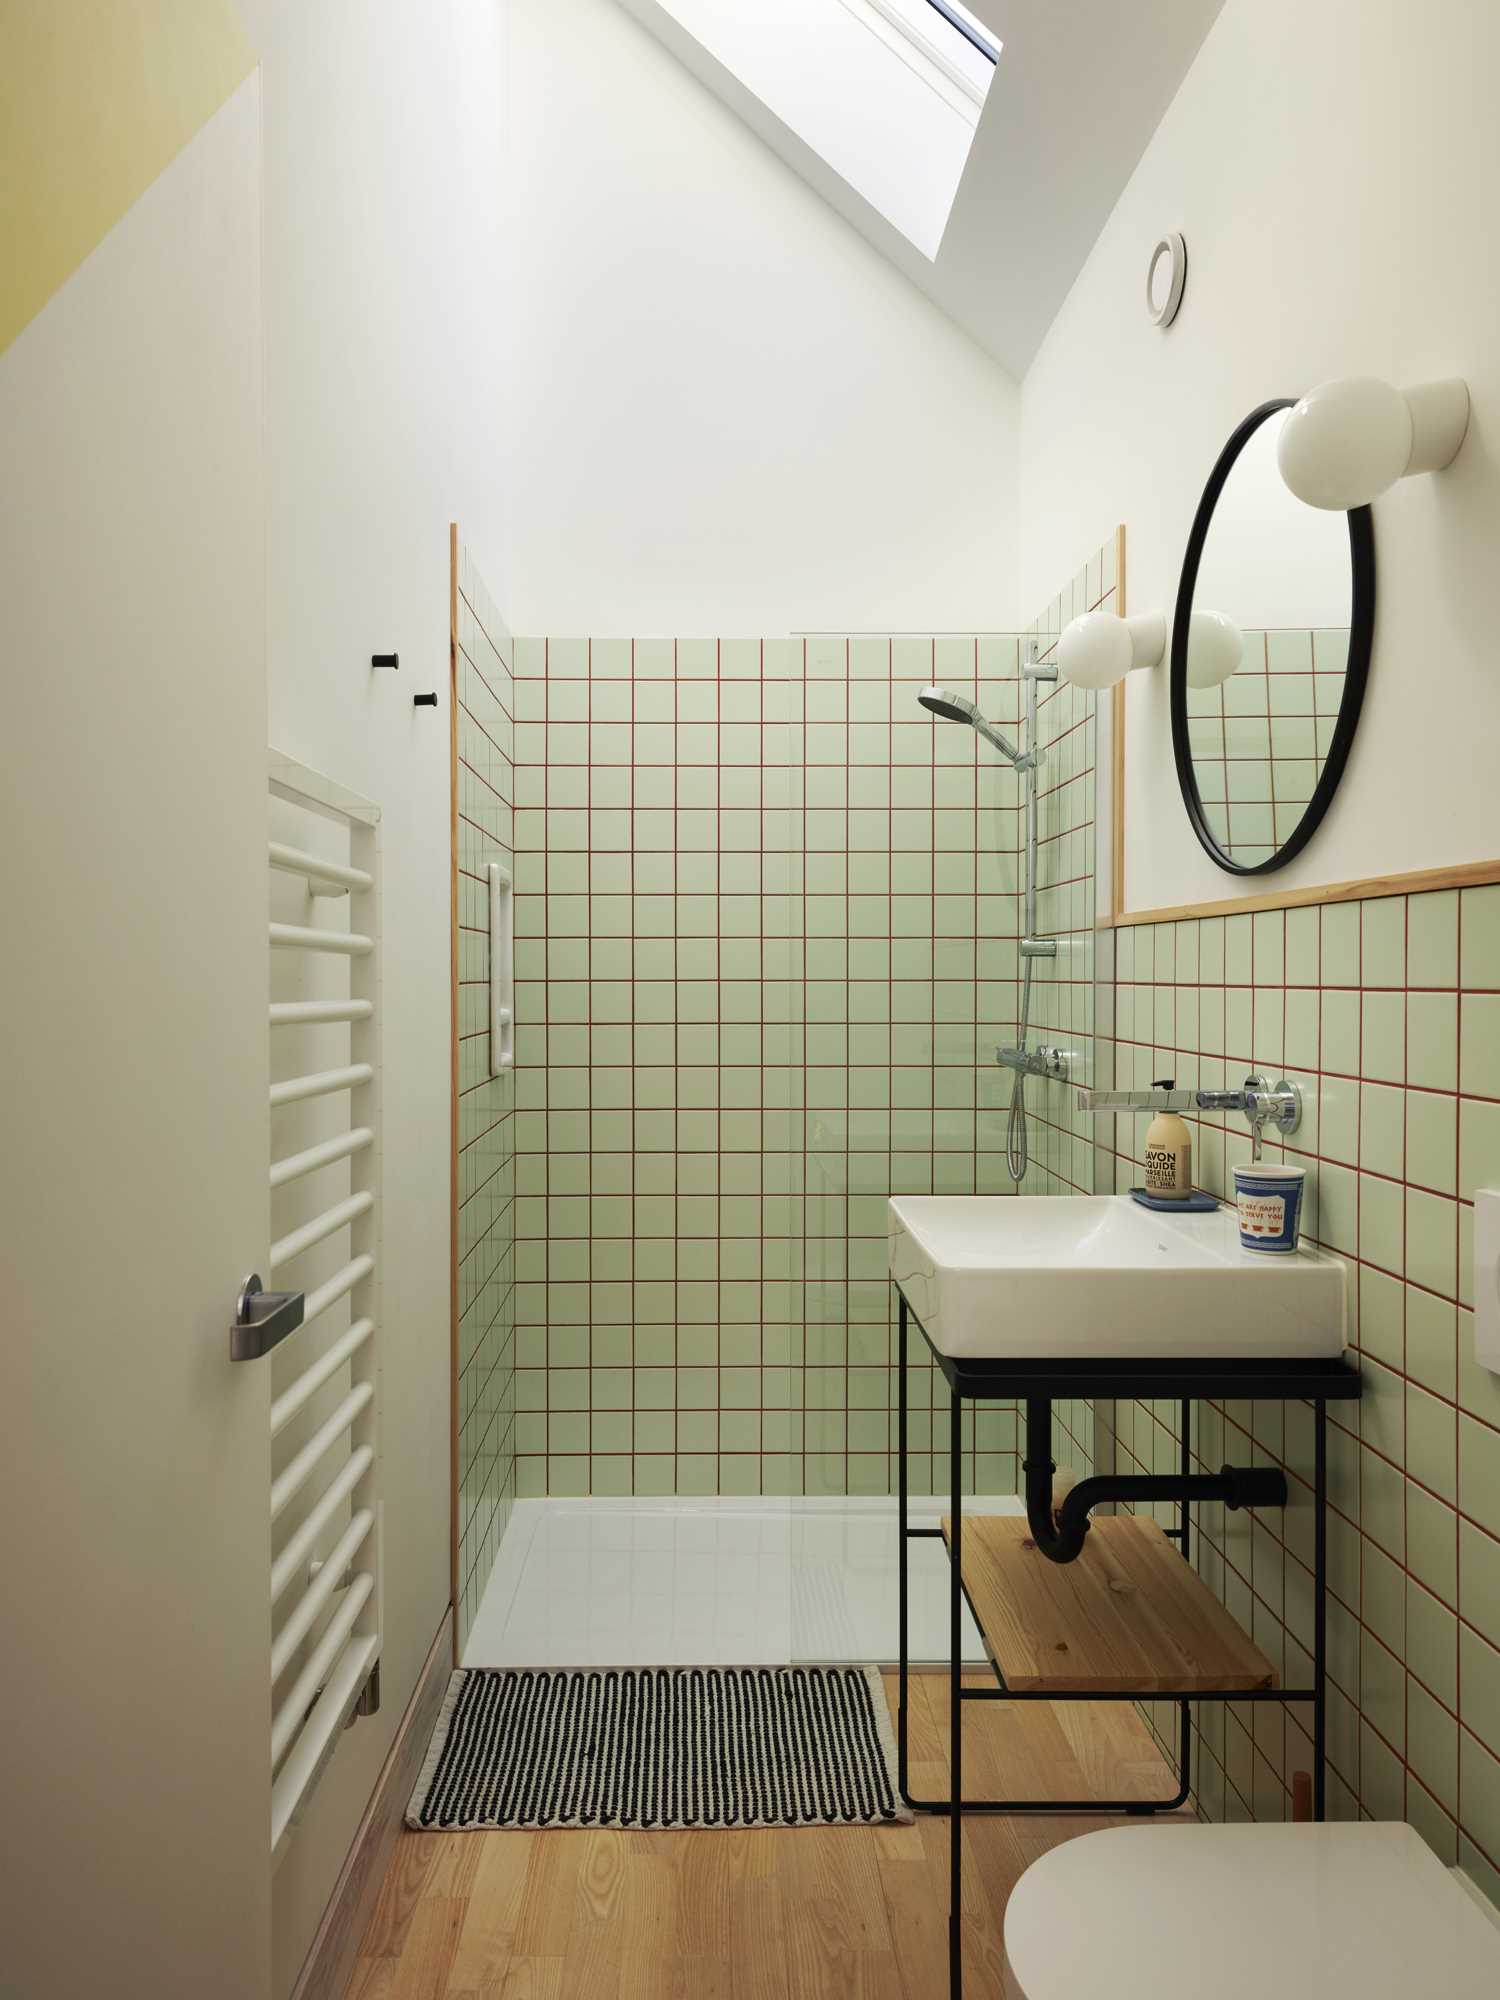 In this bathroom, the shower walls and vanity area are clad in square green tiles with colored grout.